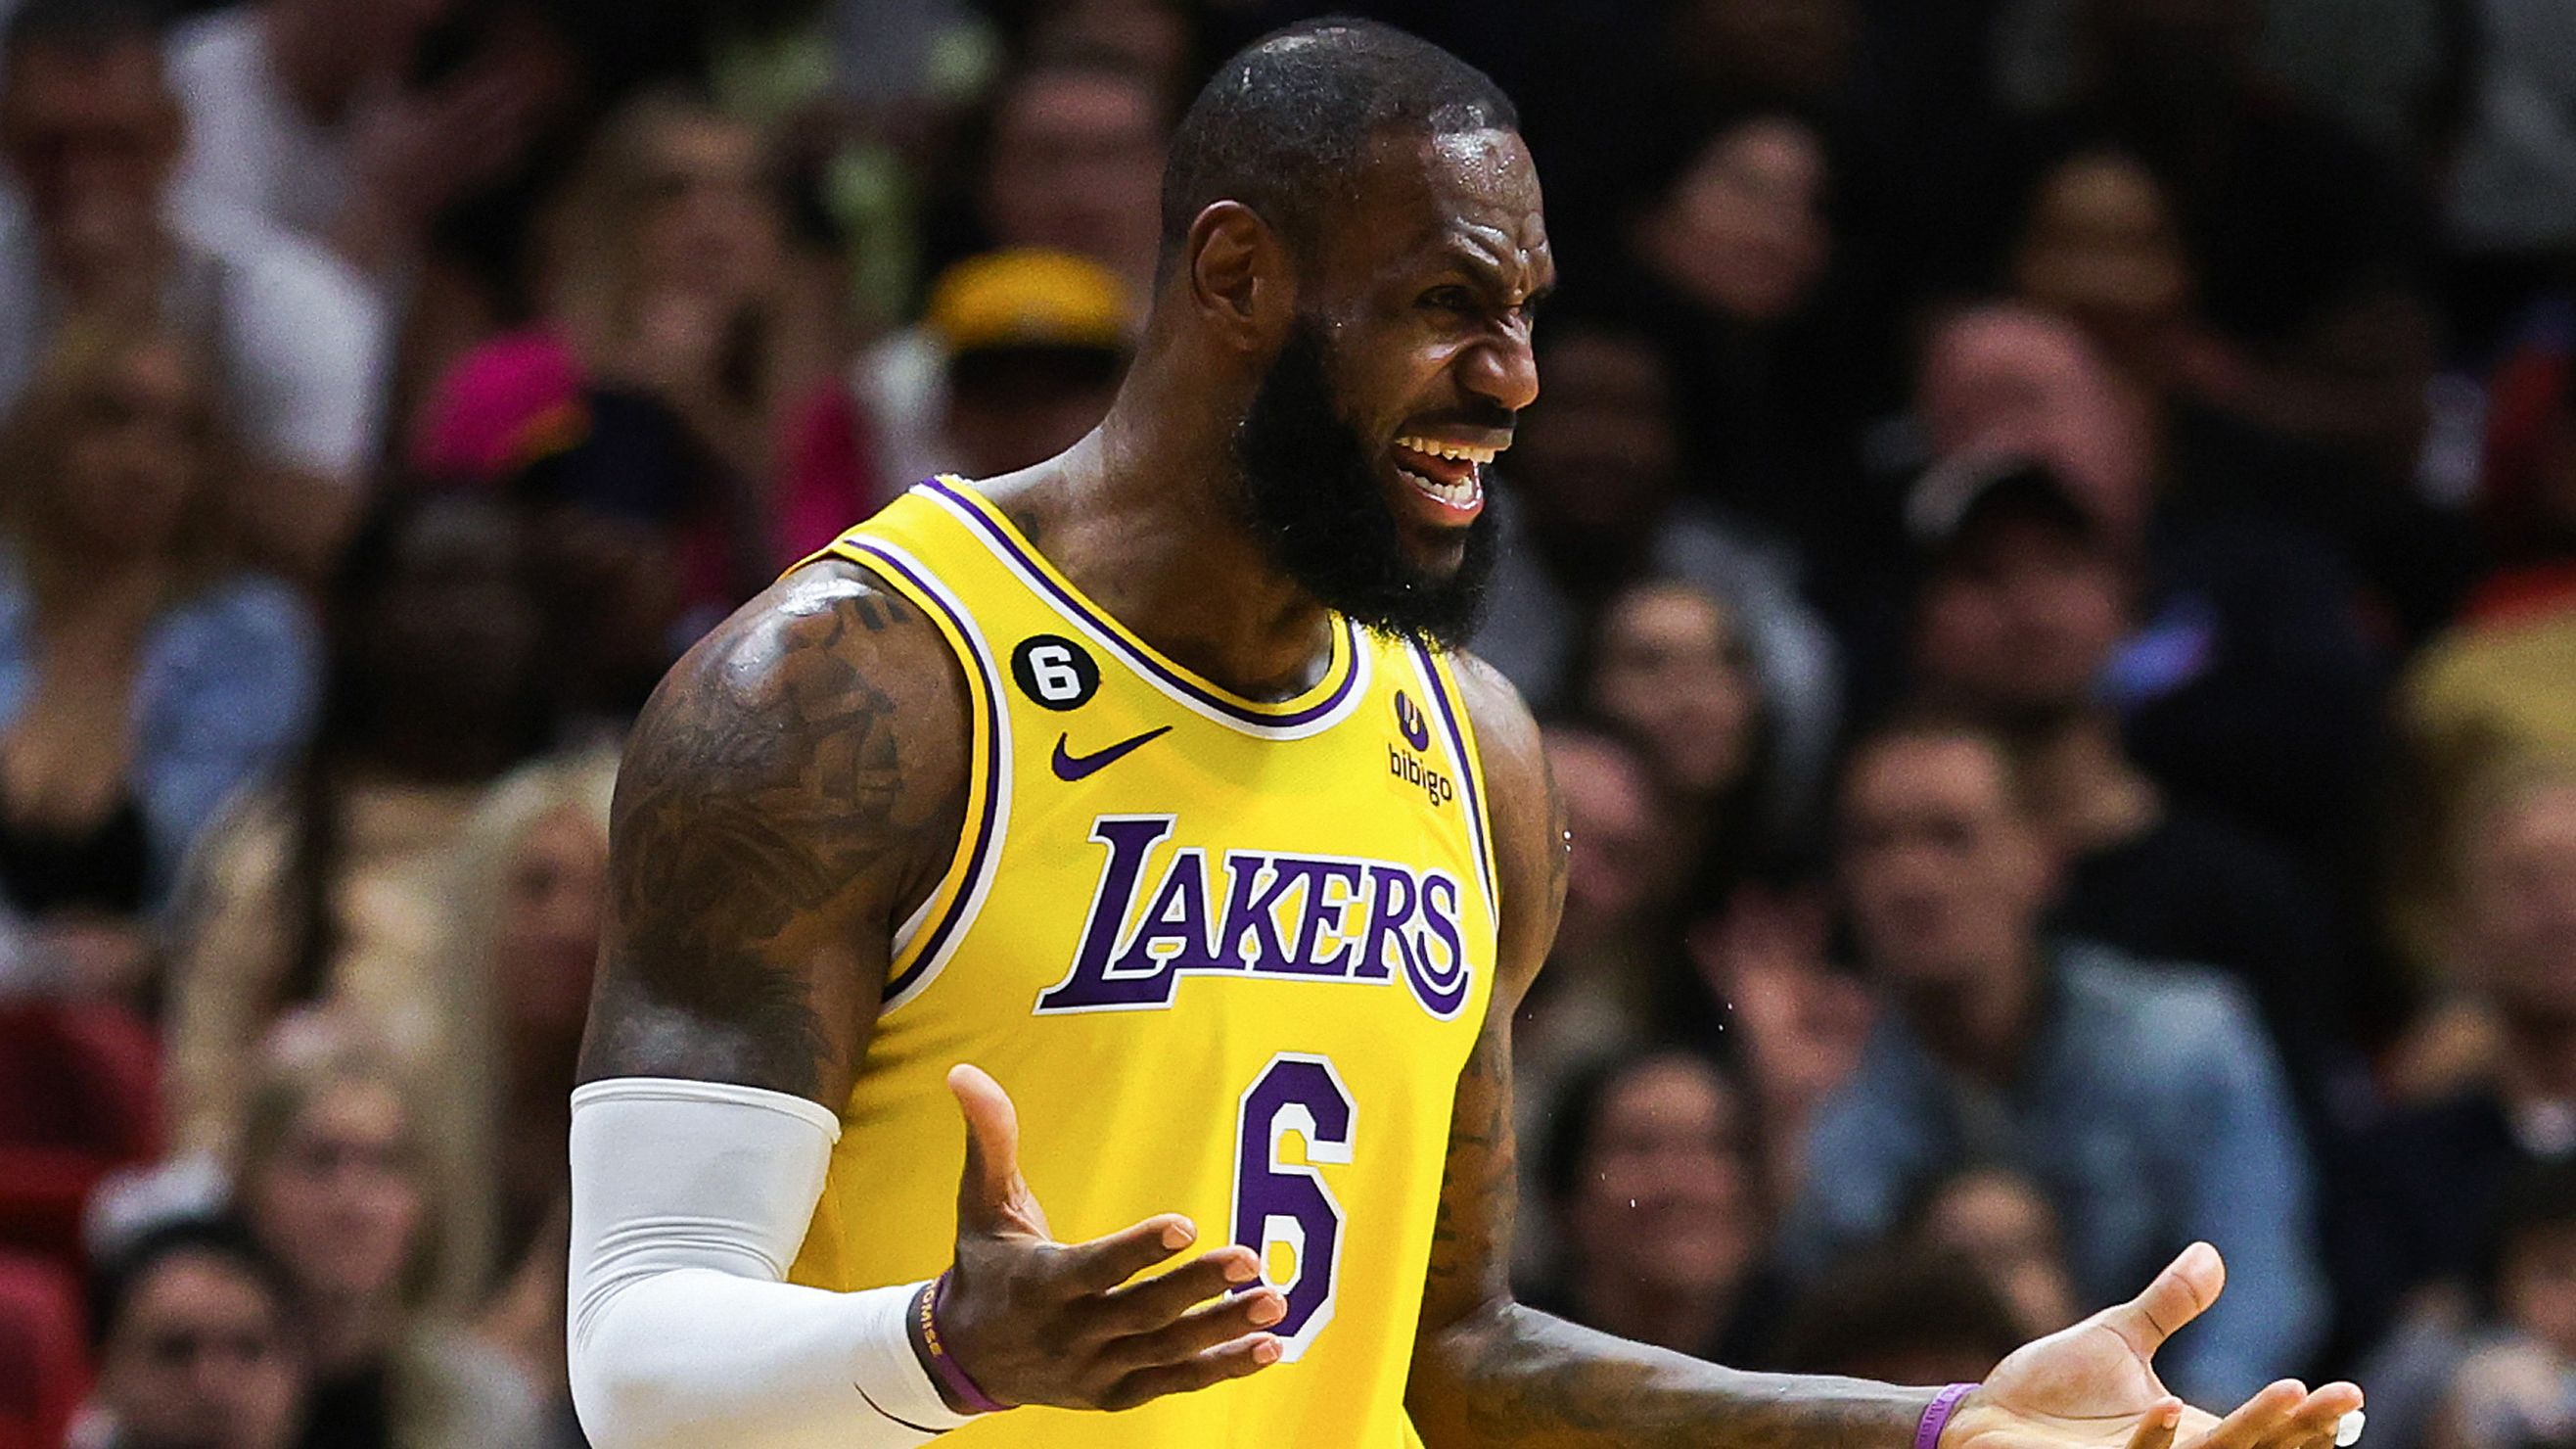 LeBron James' thinly veiled shot at Lakers bosses after another frustrating loss